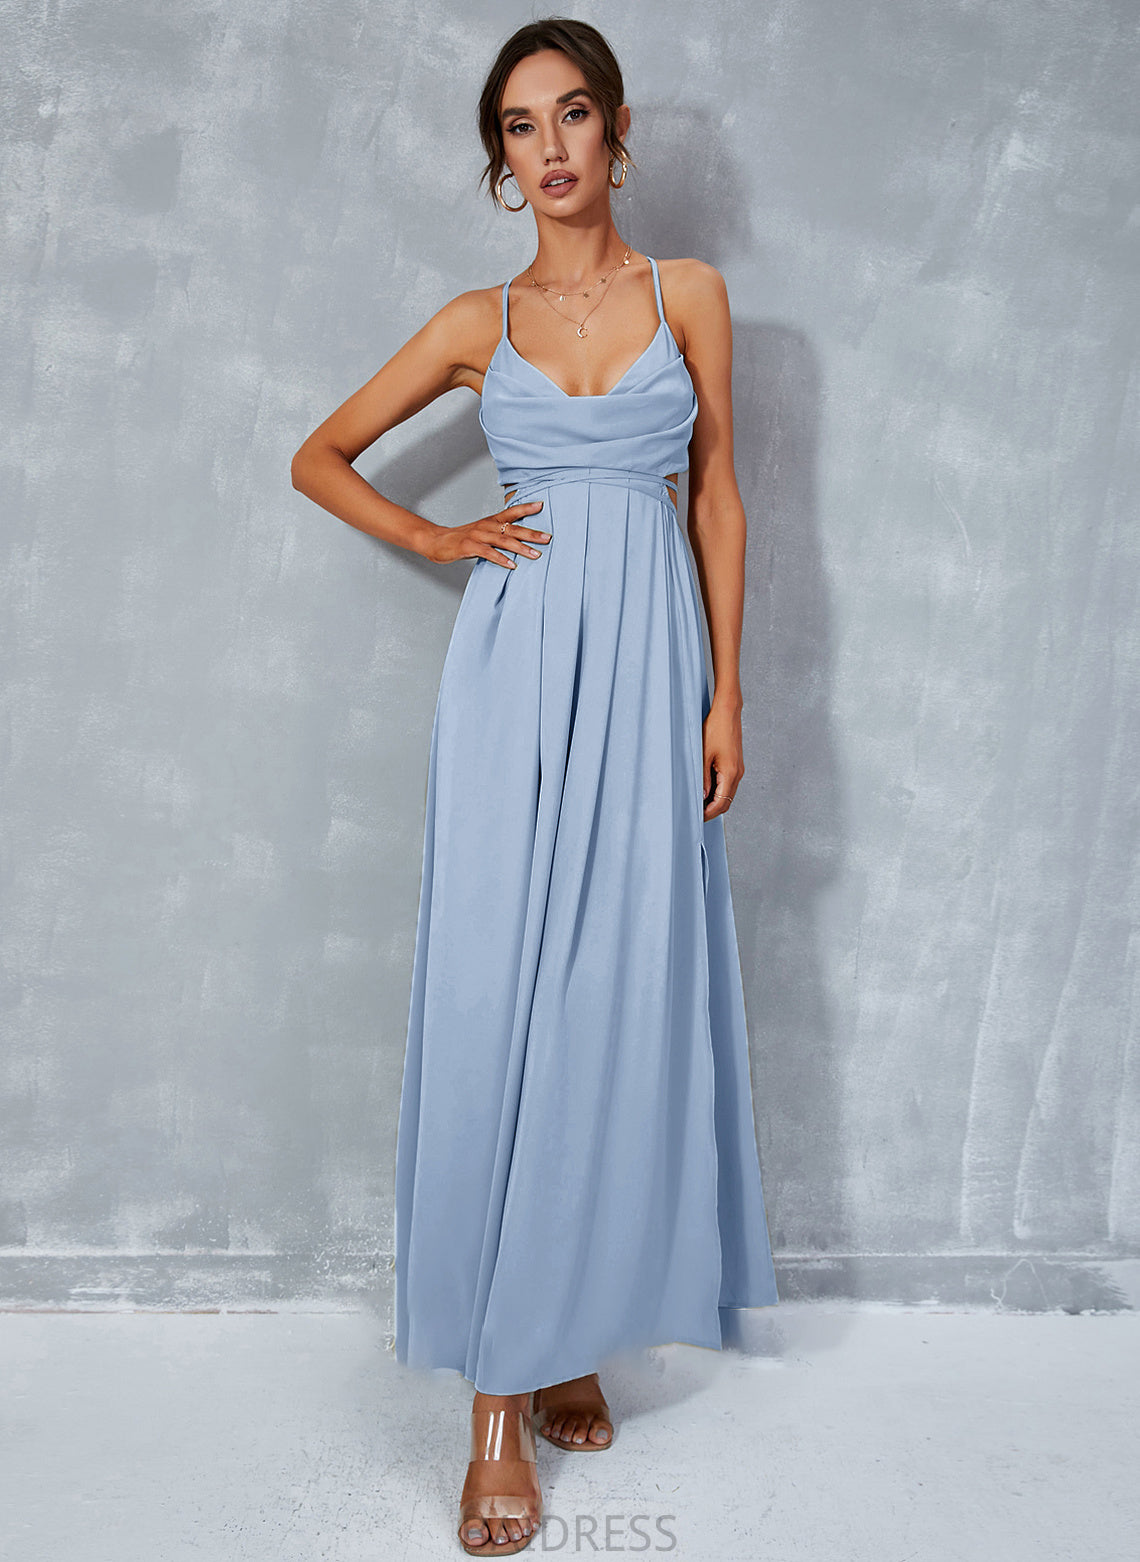 Cowl Neck With Split Front Prom Dresses Ankle-Length A-Line Miriam